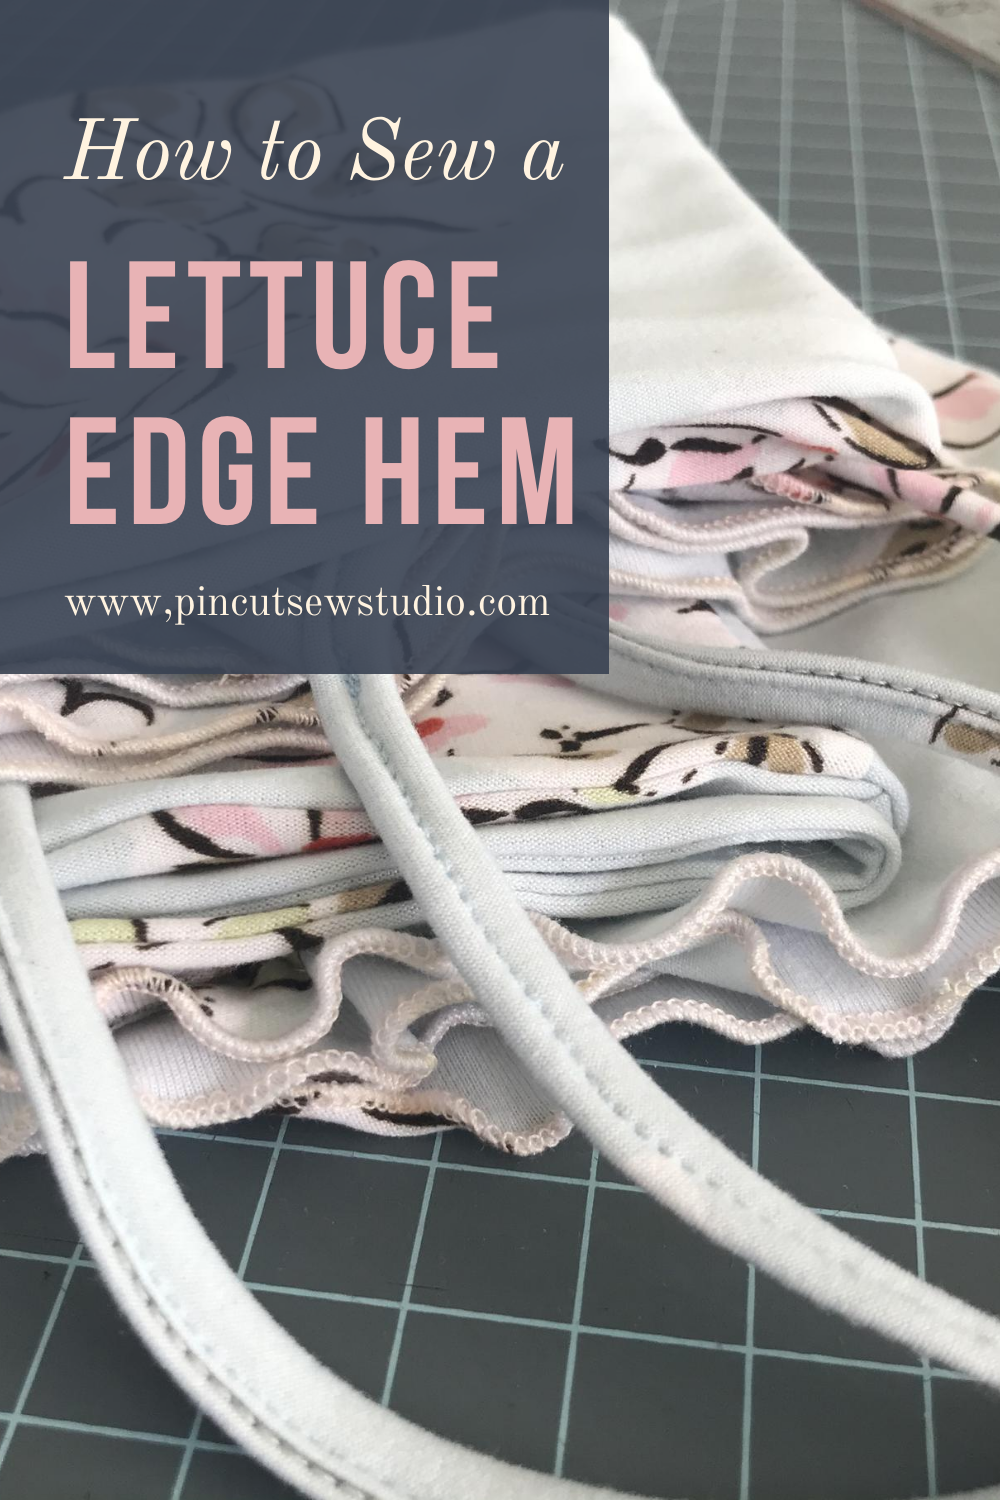 How to Sew a Lettuce Edge Hem on Your Serger — Pin Cut Sew Studio